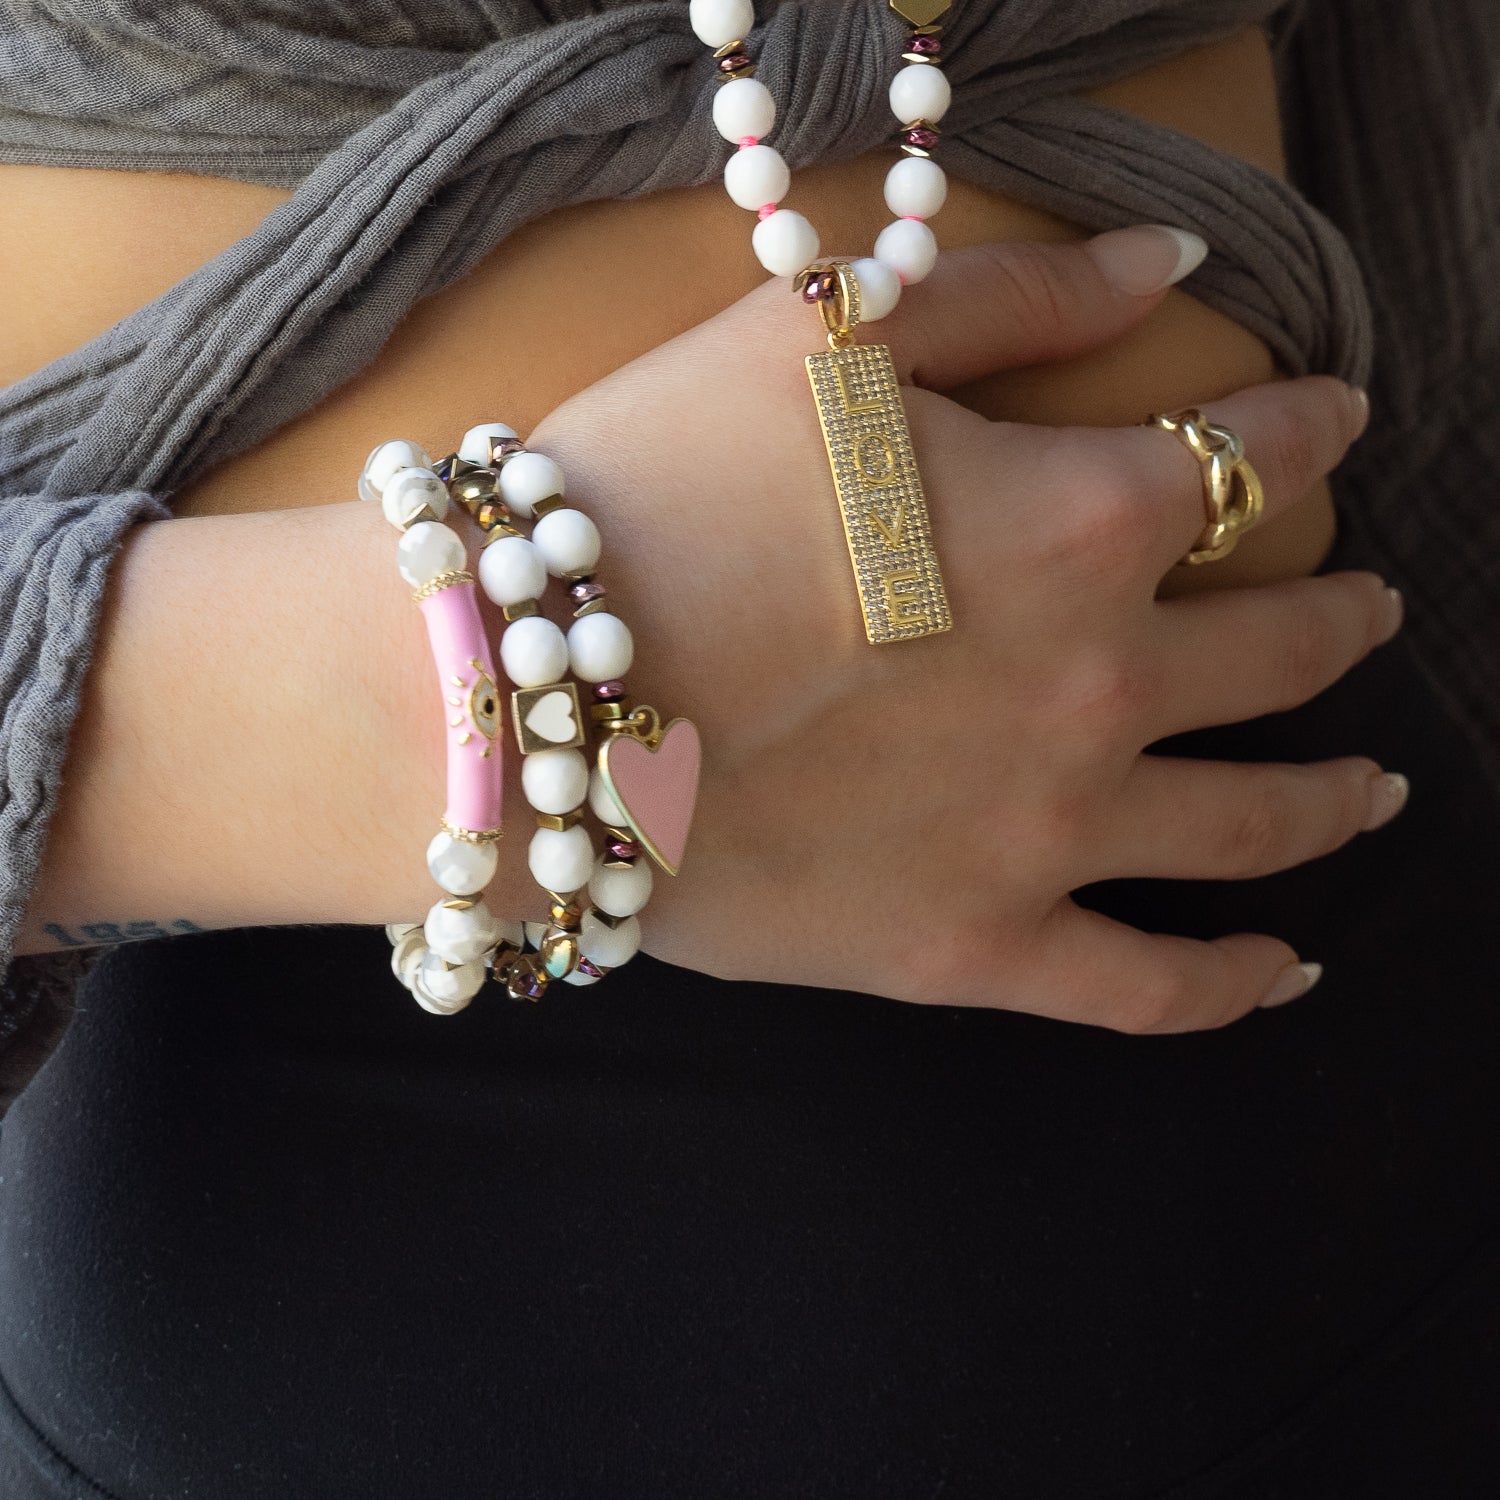 Embrace the Love Protection Bracelet, beautifully showcased by our model, exuding elegance and positive energy.